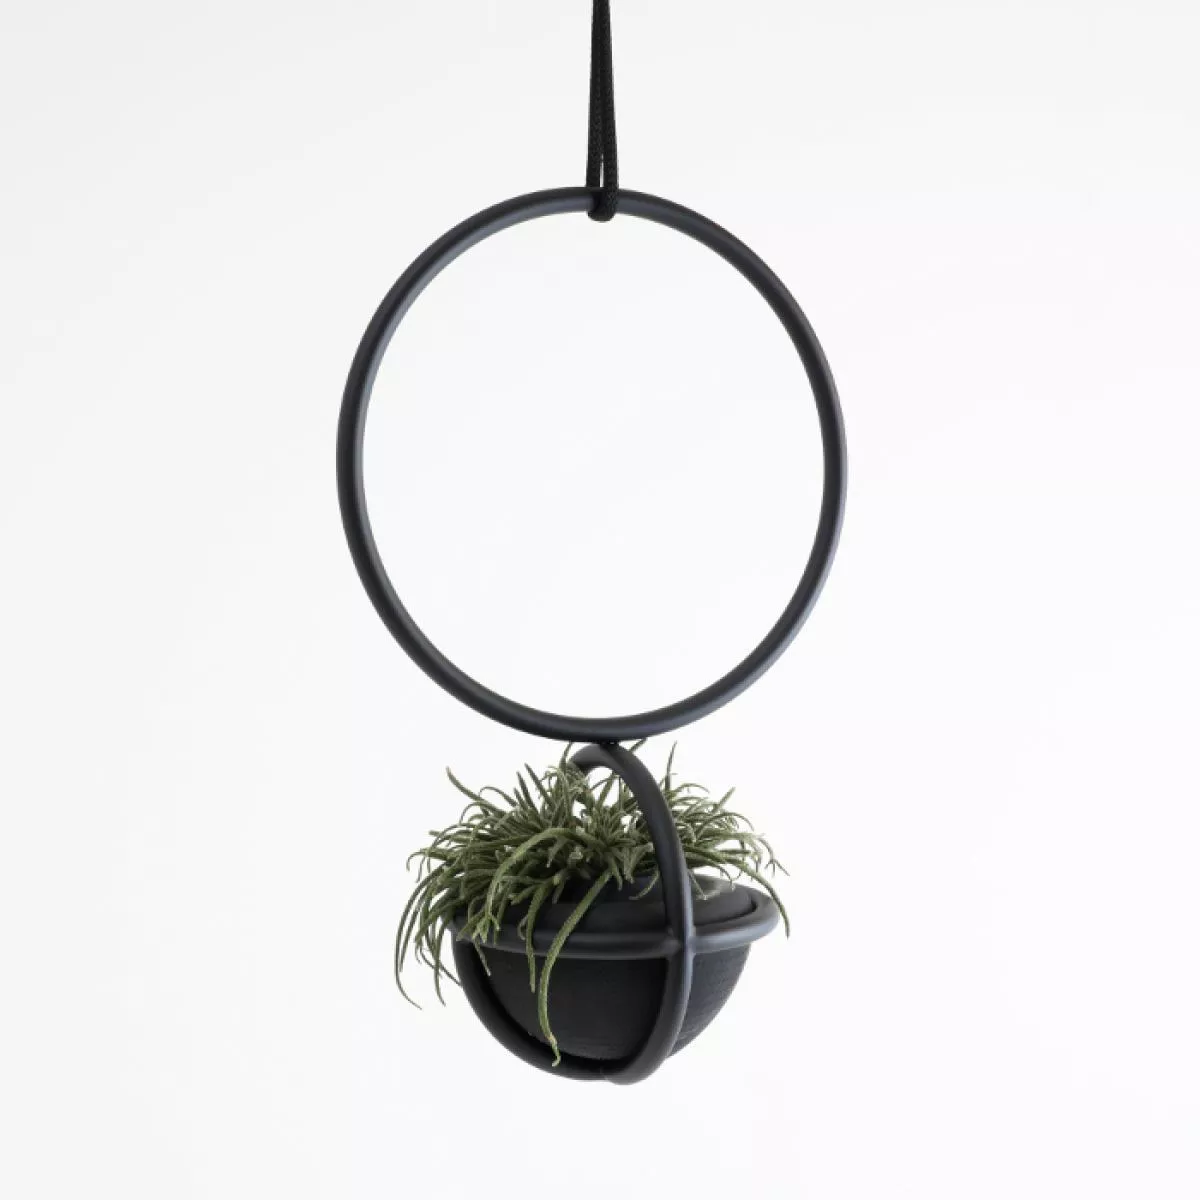 Special edition flower suspension with handmade rubber vase/pot